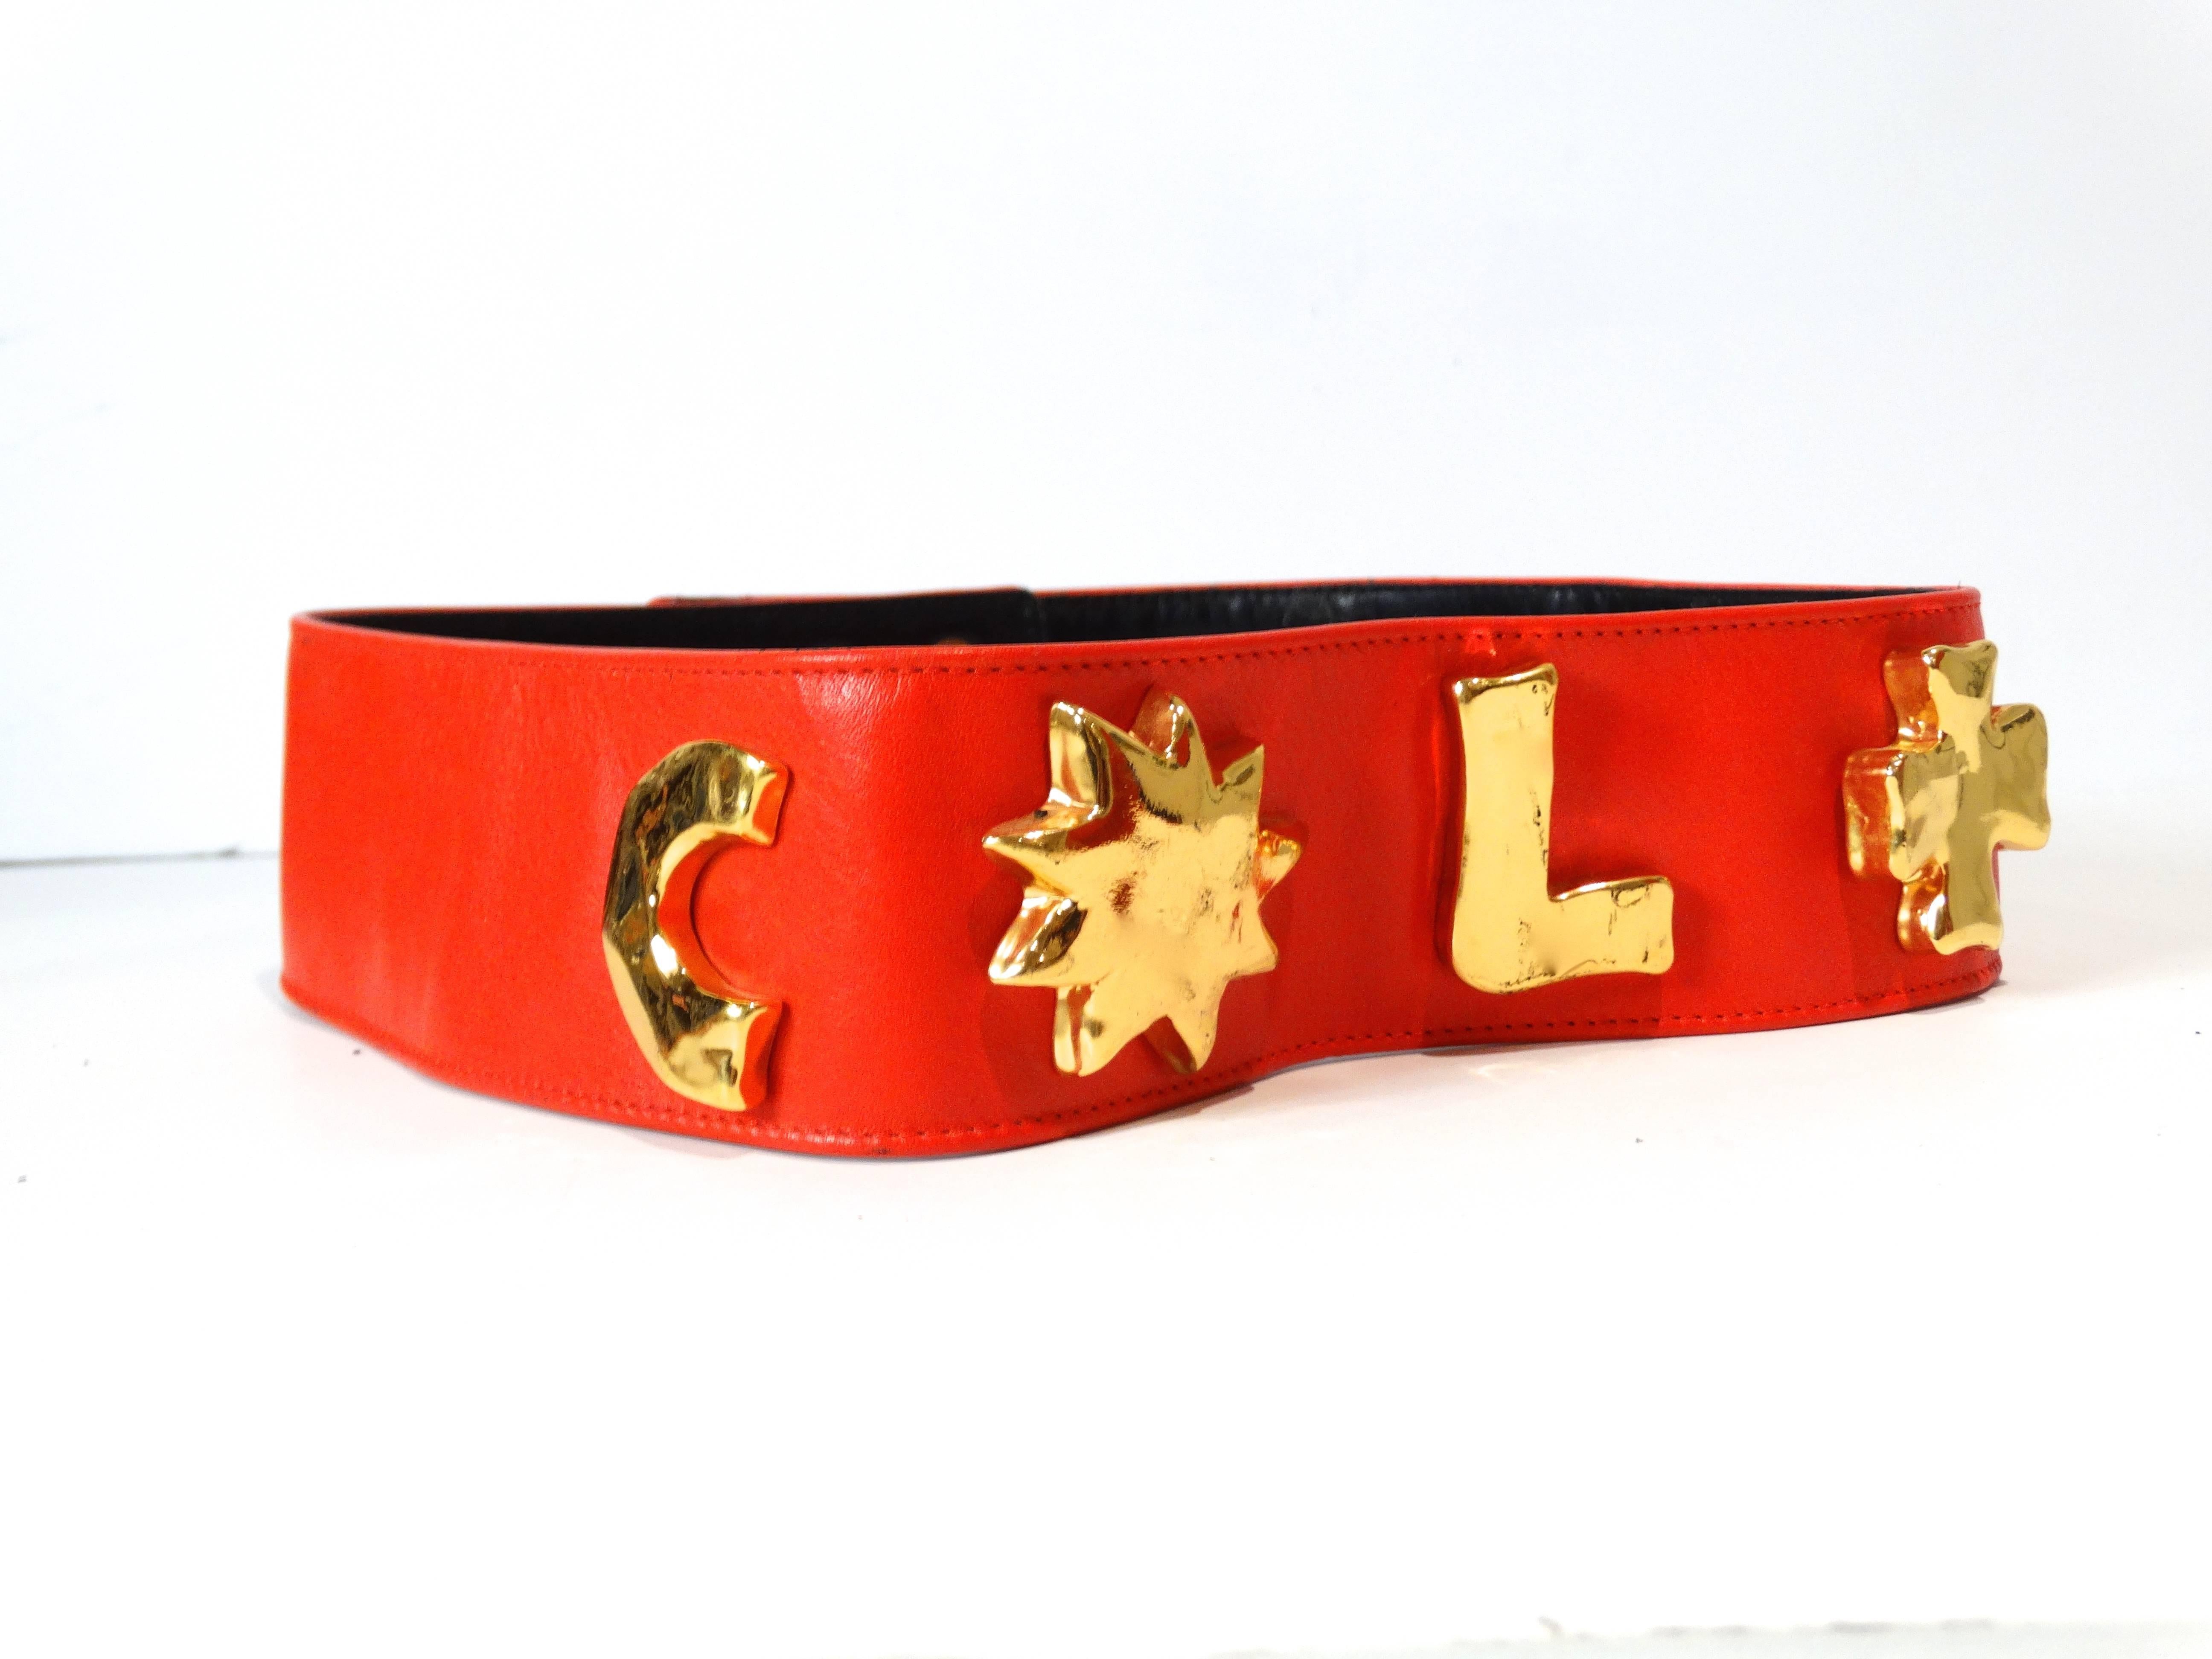 Make a statement with this iconic 1990's Christian Lacroix red leather belt with 5 gold raised iconic Lacroix emblems: C, Star, L, Cross and Heart. Adjustable double hook and holes closure.Stamped CHRISTIAN LACROIX PARIS 70/28 Made in France inside.